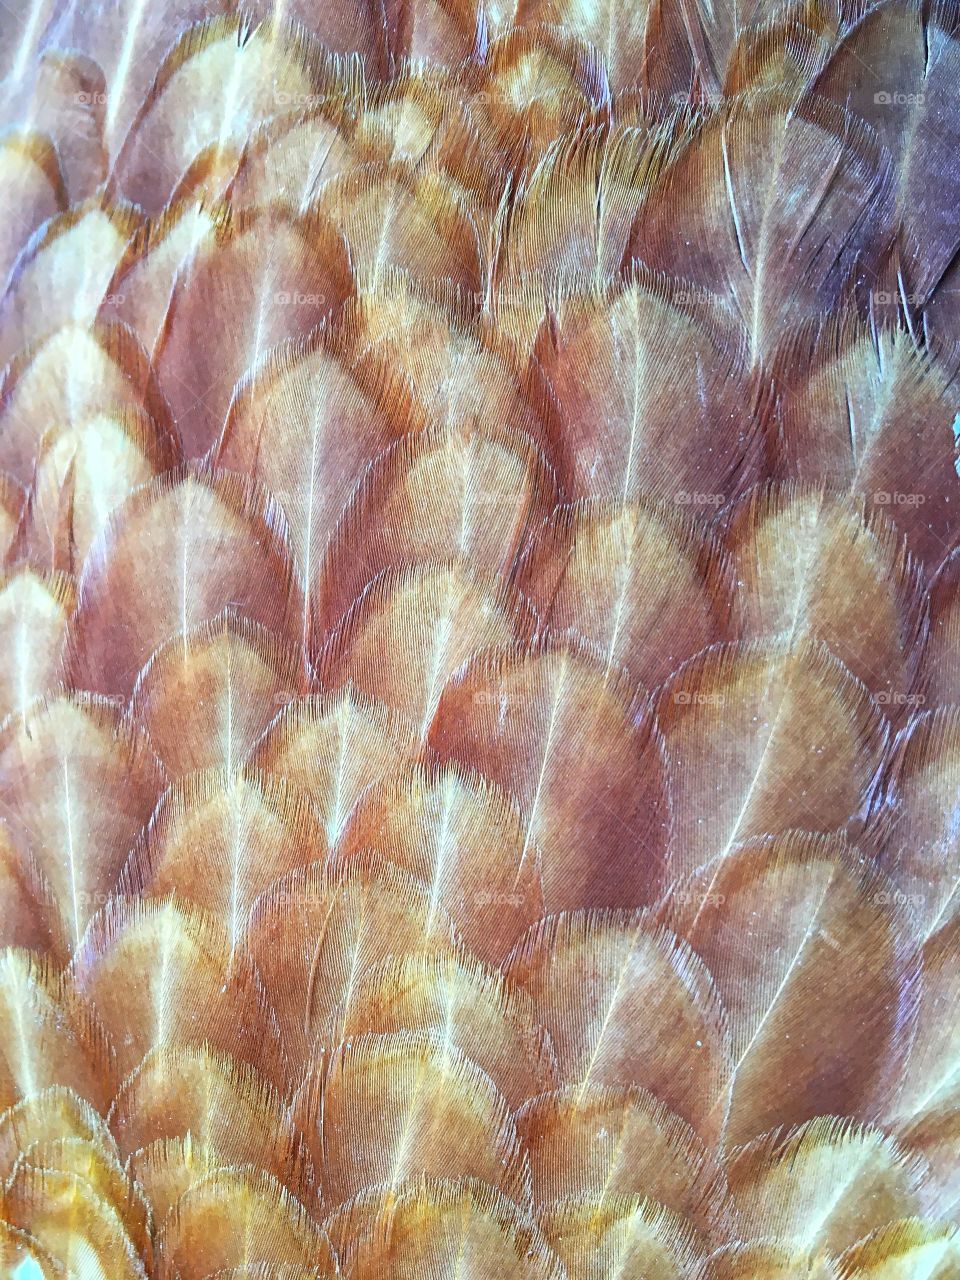 Red Hen Feathers Texture 